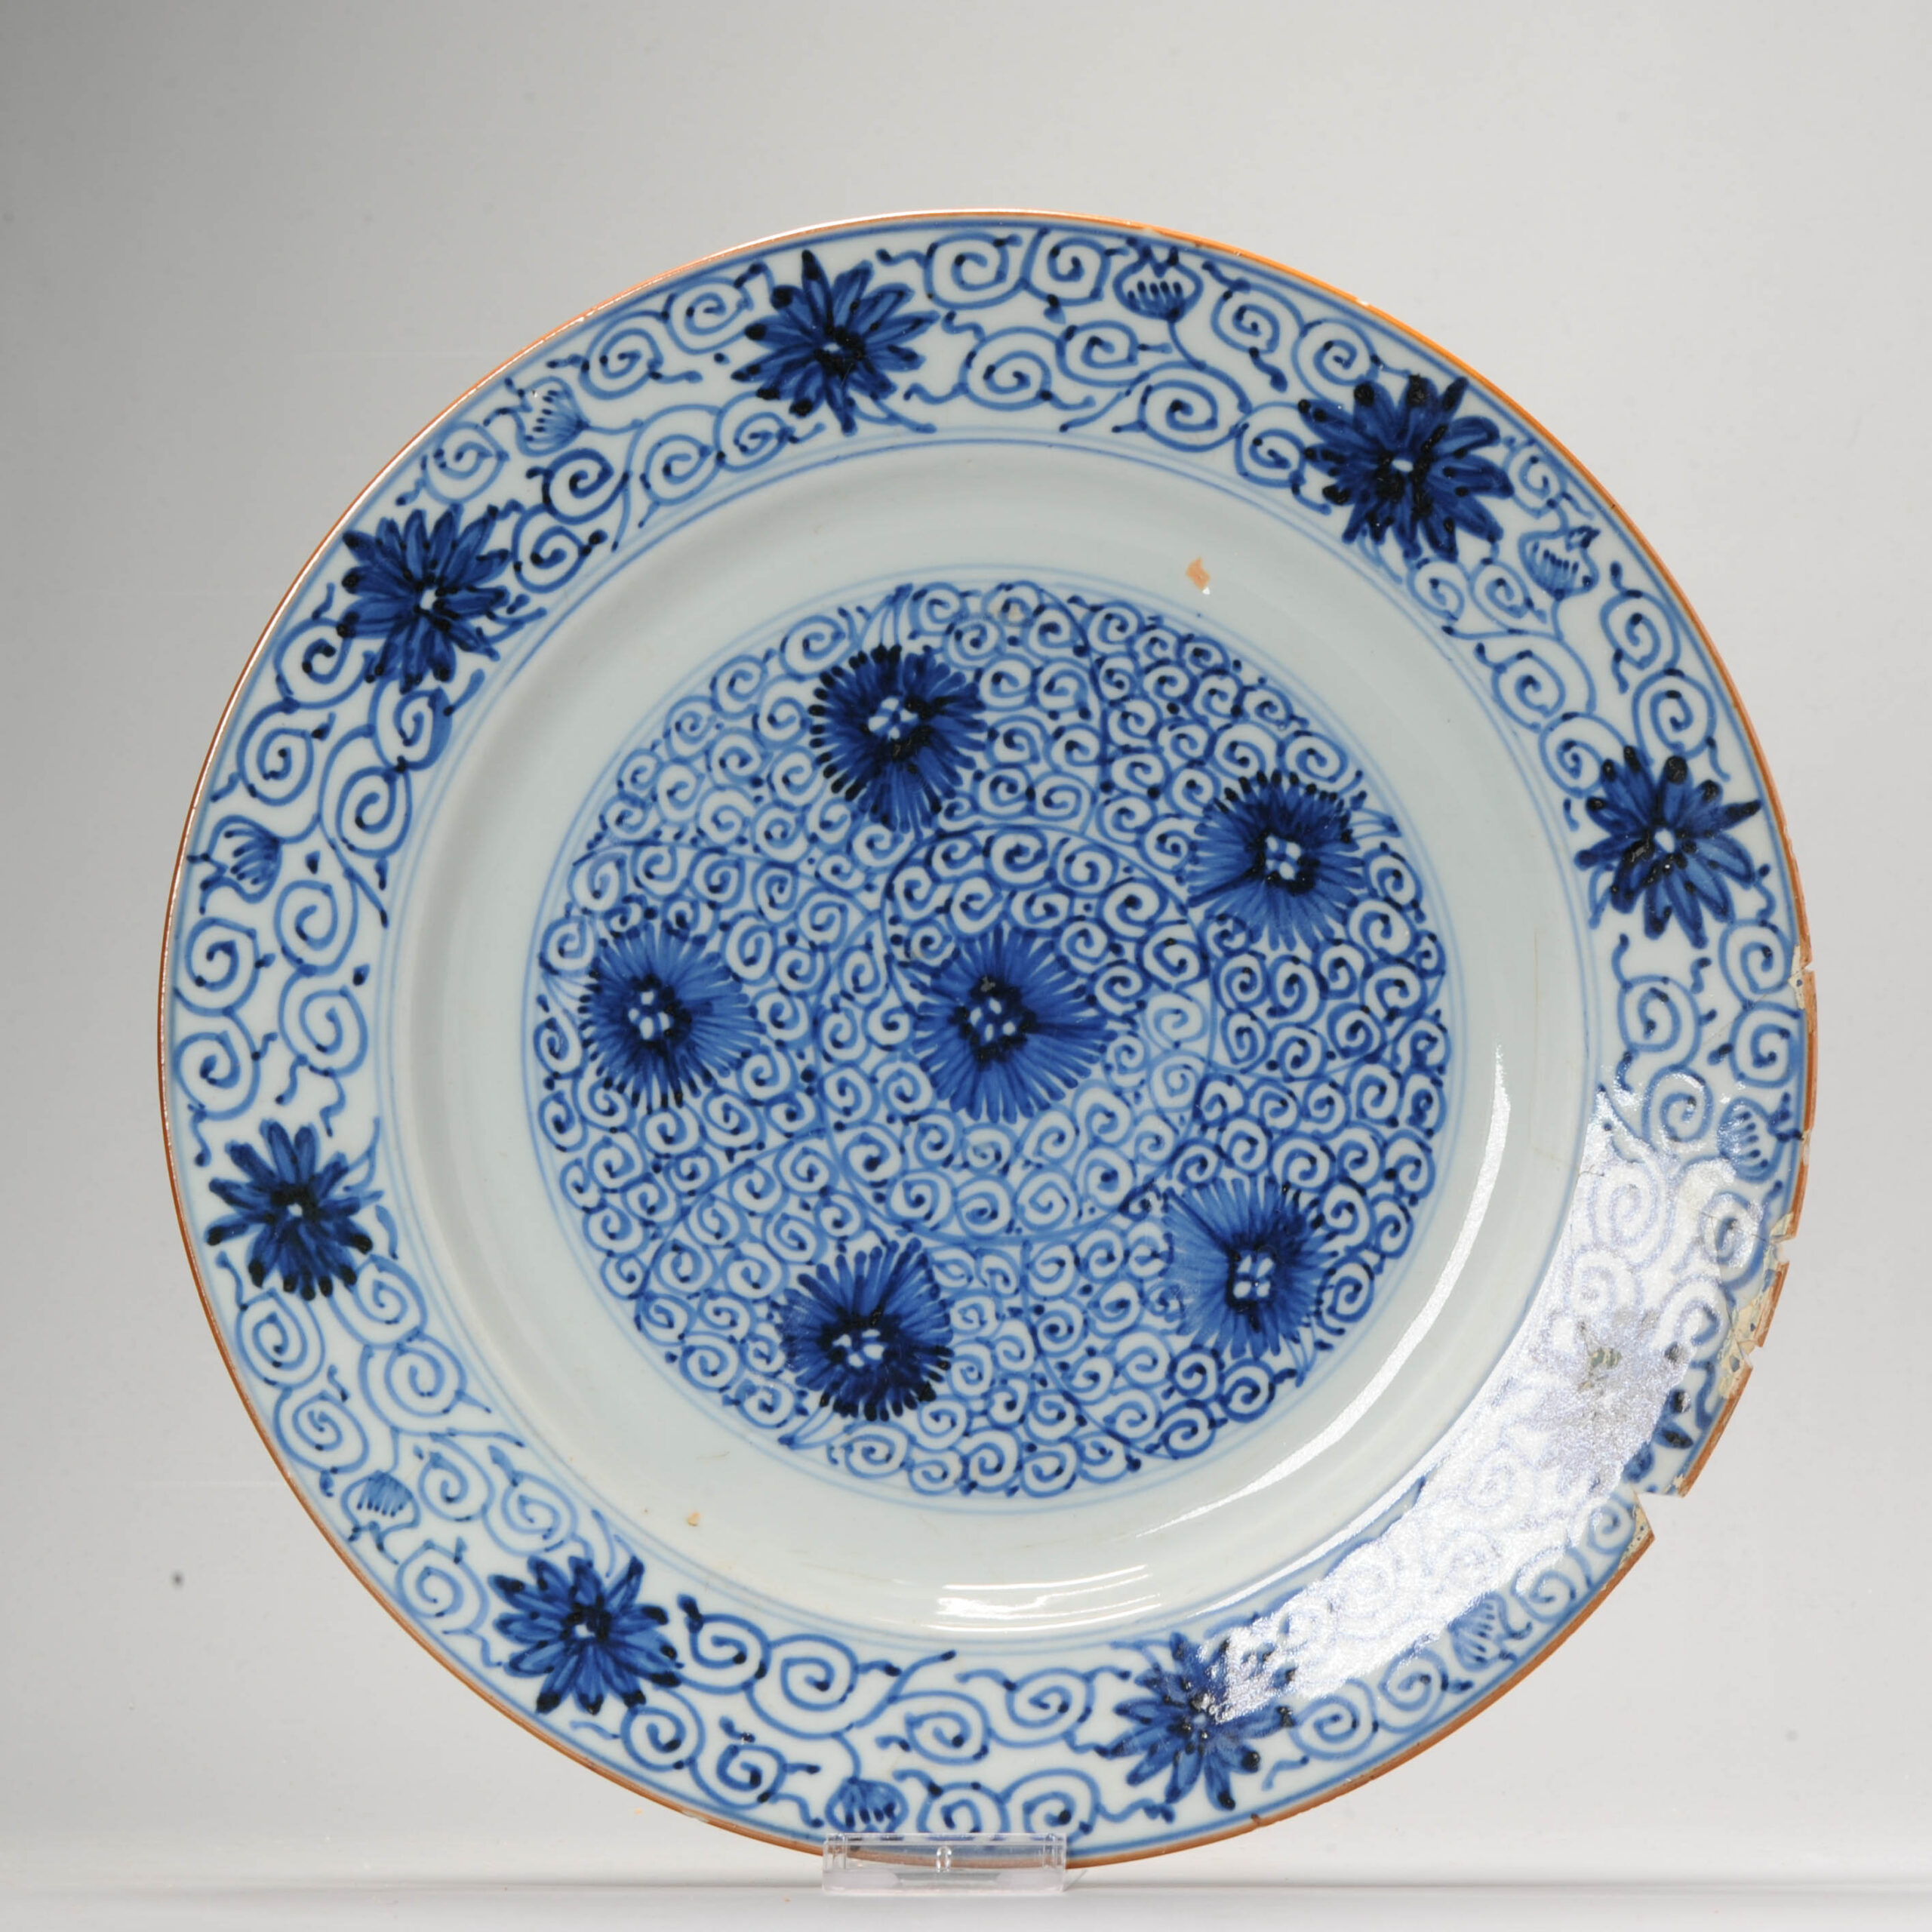 1132 Lovely Kangxi or Yongzheng Blue and White plate With CHrystantemum Decoration